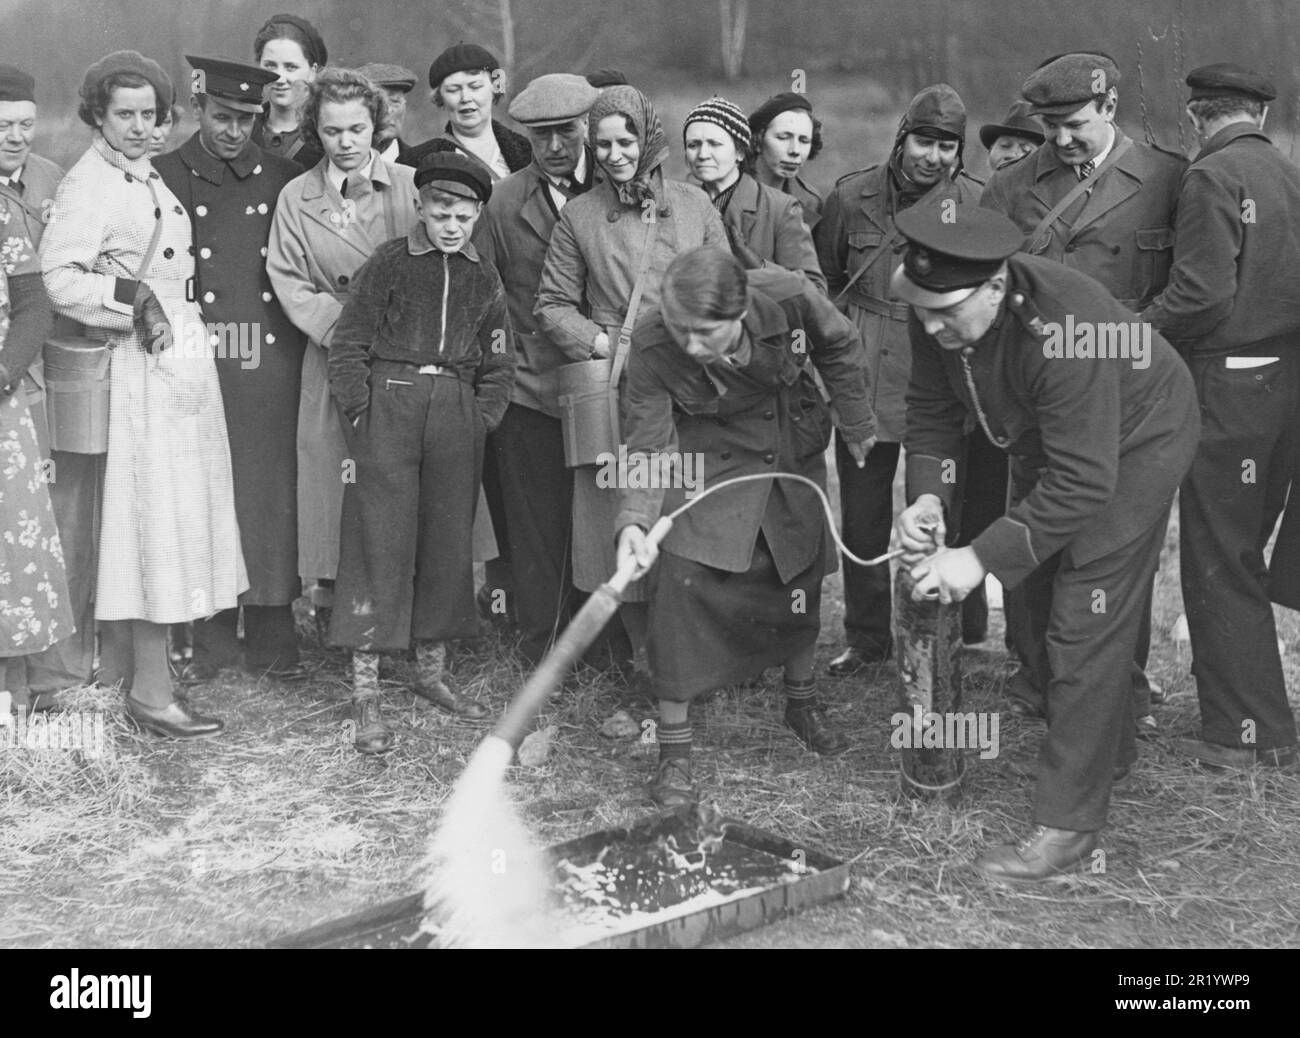 Preparations for wartime. The year is 1939 and Sweden is strenghtening it's civilian community and holds courses so people can act swifly when there is a fire. This in view of the talk of war in Europe and the encreased risk of sweden being involved in the war.  Pictured a member of the air defence organization that instructs how to use a fire extinguisher. Stockholm 27 april 1939. Stock Photo